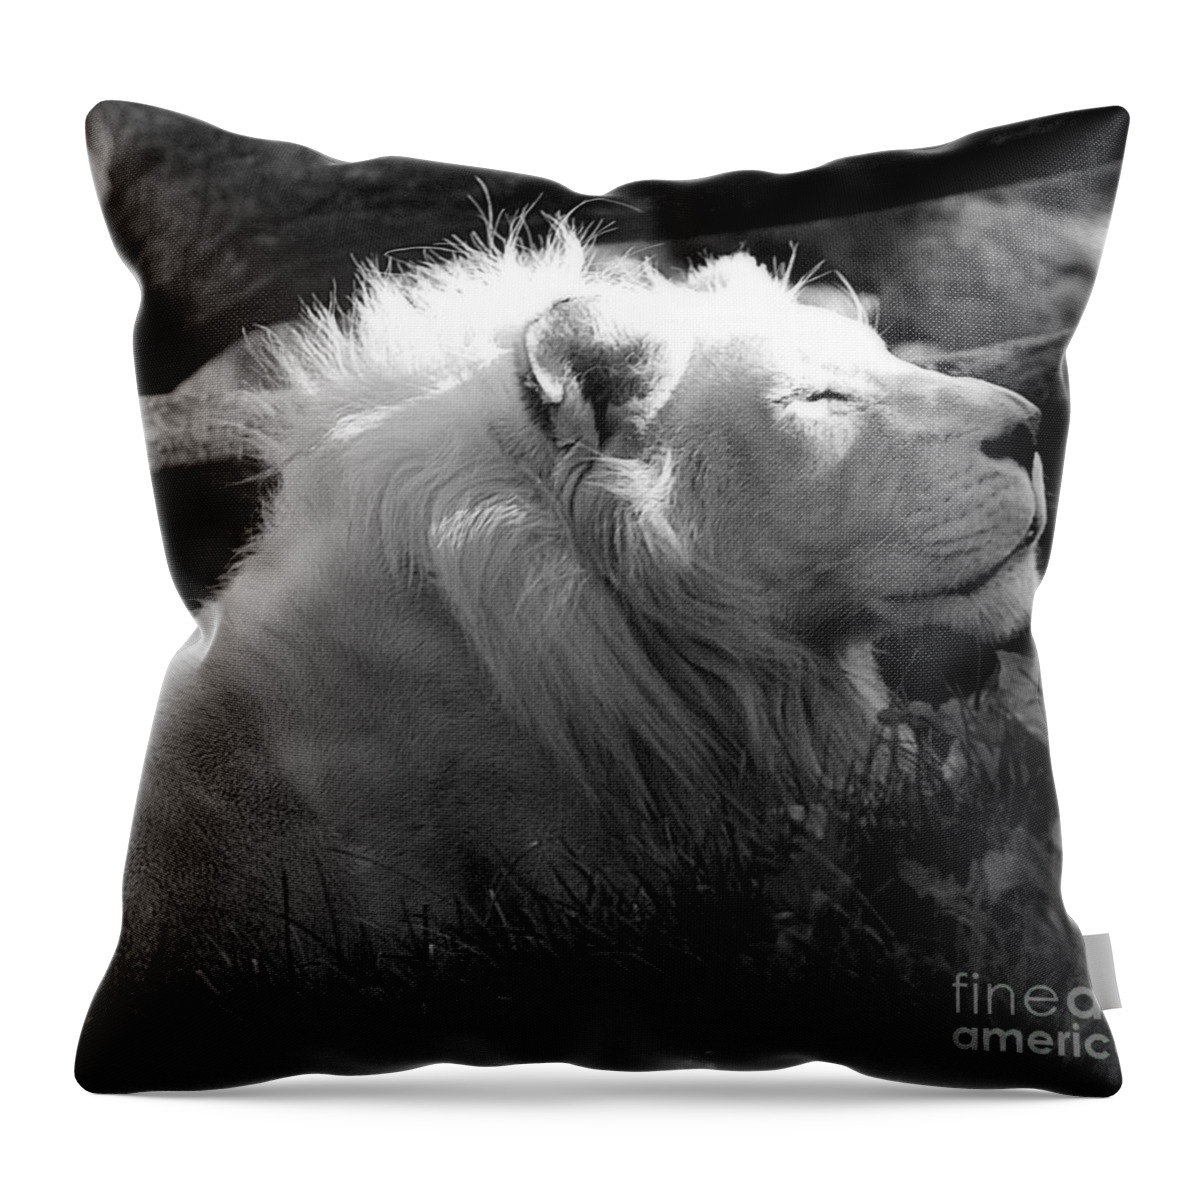 Marcia Lee Jones Throw Pillow featuring the photograph The White King by Marcia Lee Jones